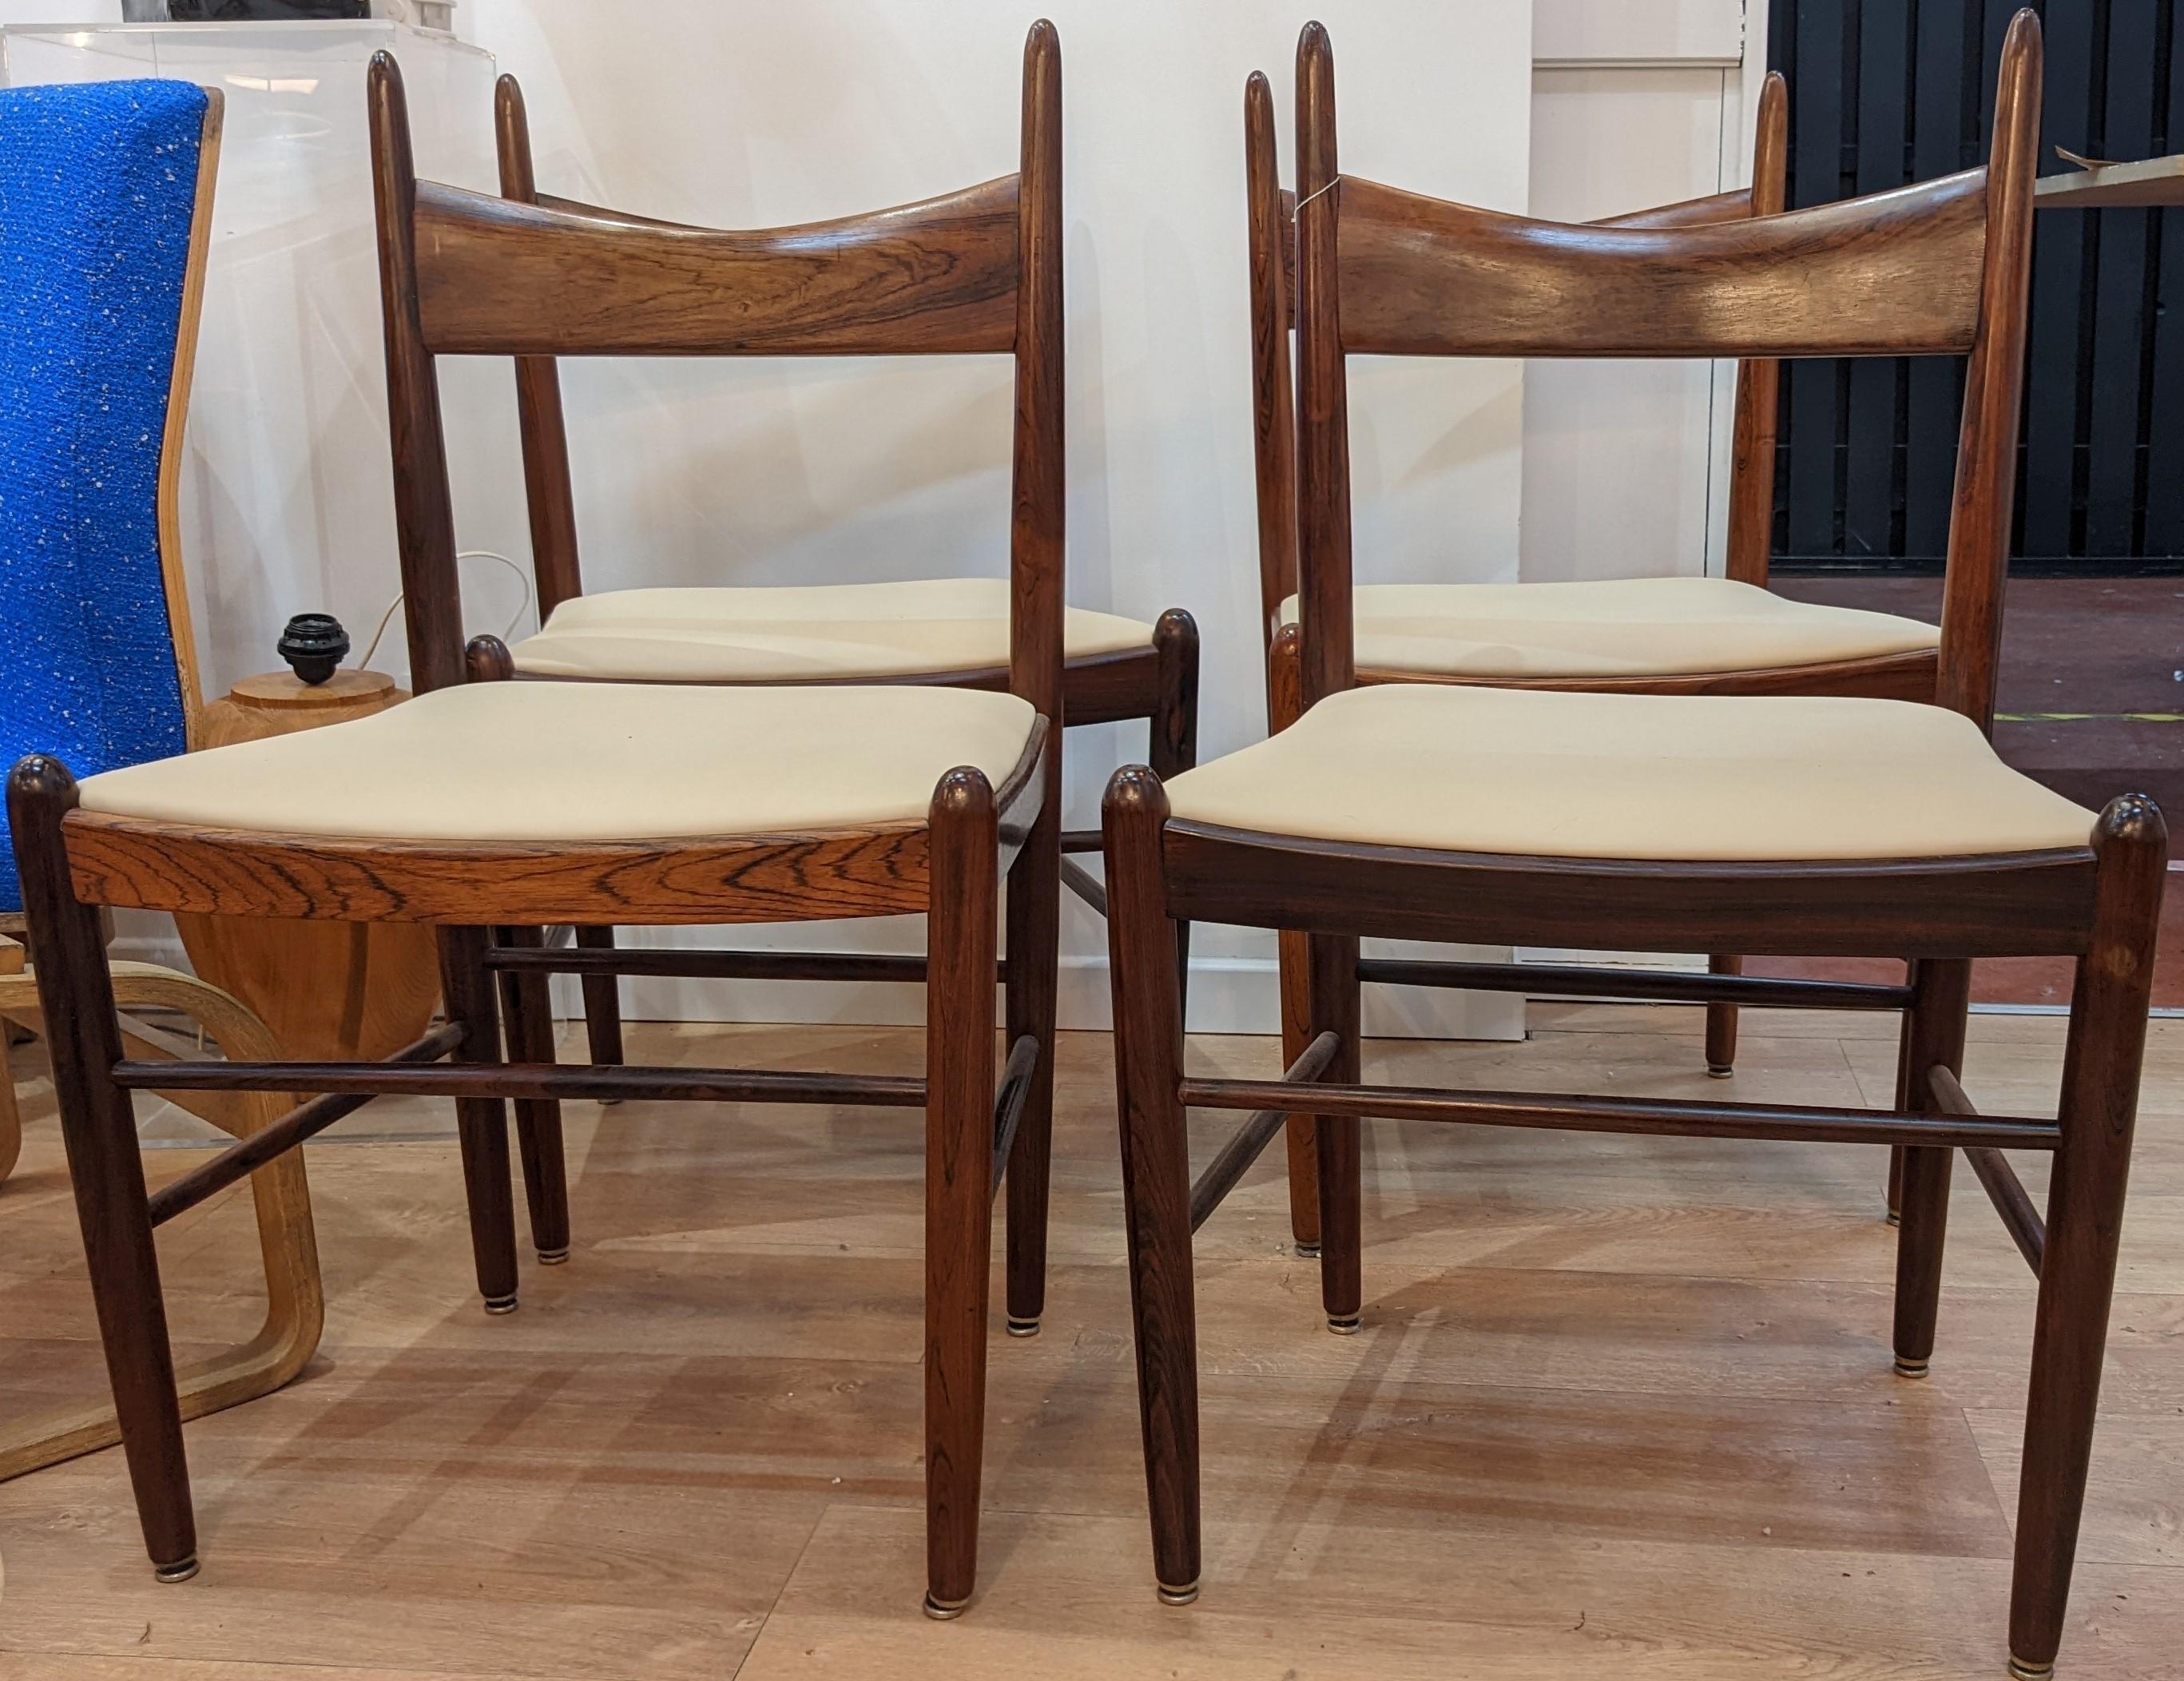 Leather Set of 4 Chairs by Vestervig Eriksen for Tromborg Mobelfabrik, Circa 1960 For Sale